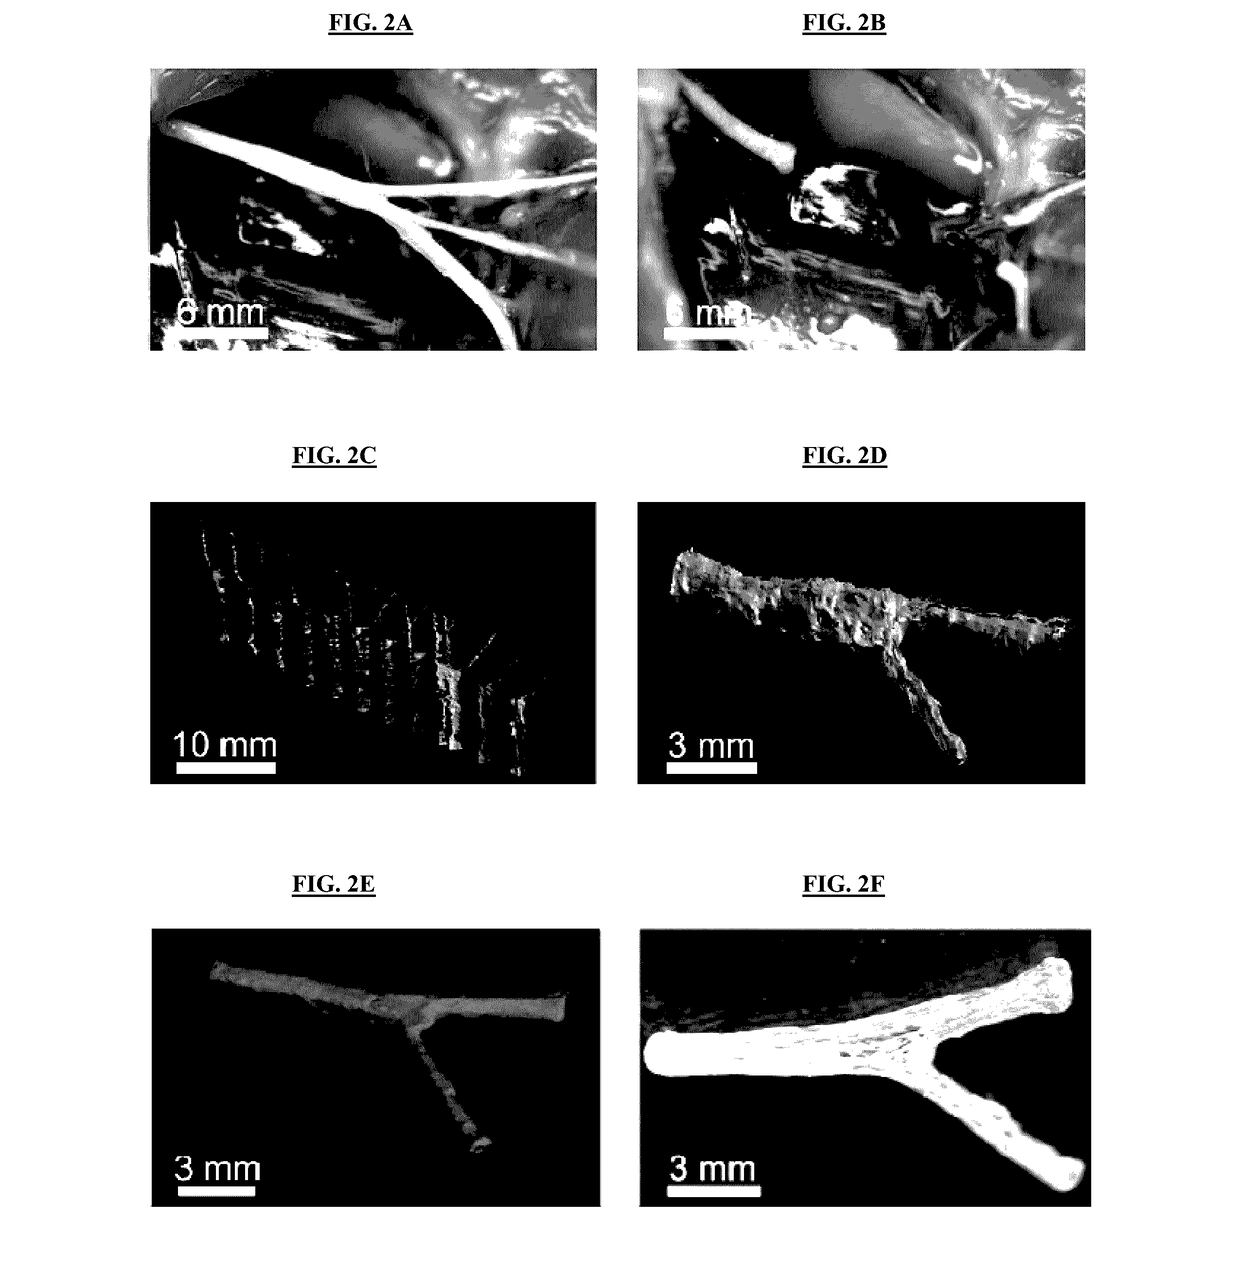 3D printed patient-specific conduits for treating complex peripheral nerve injury